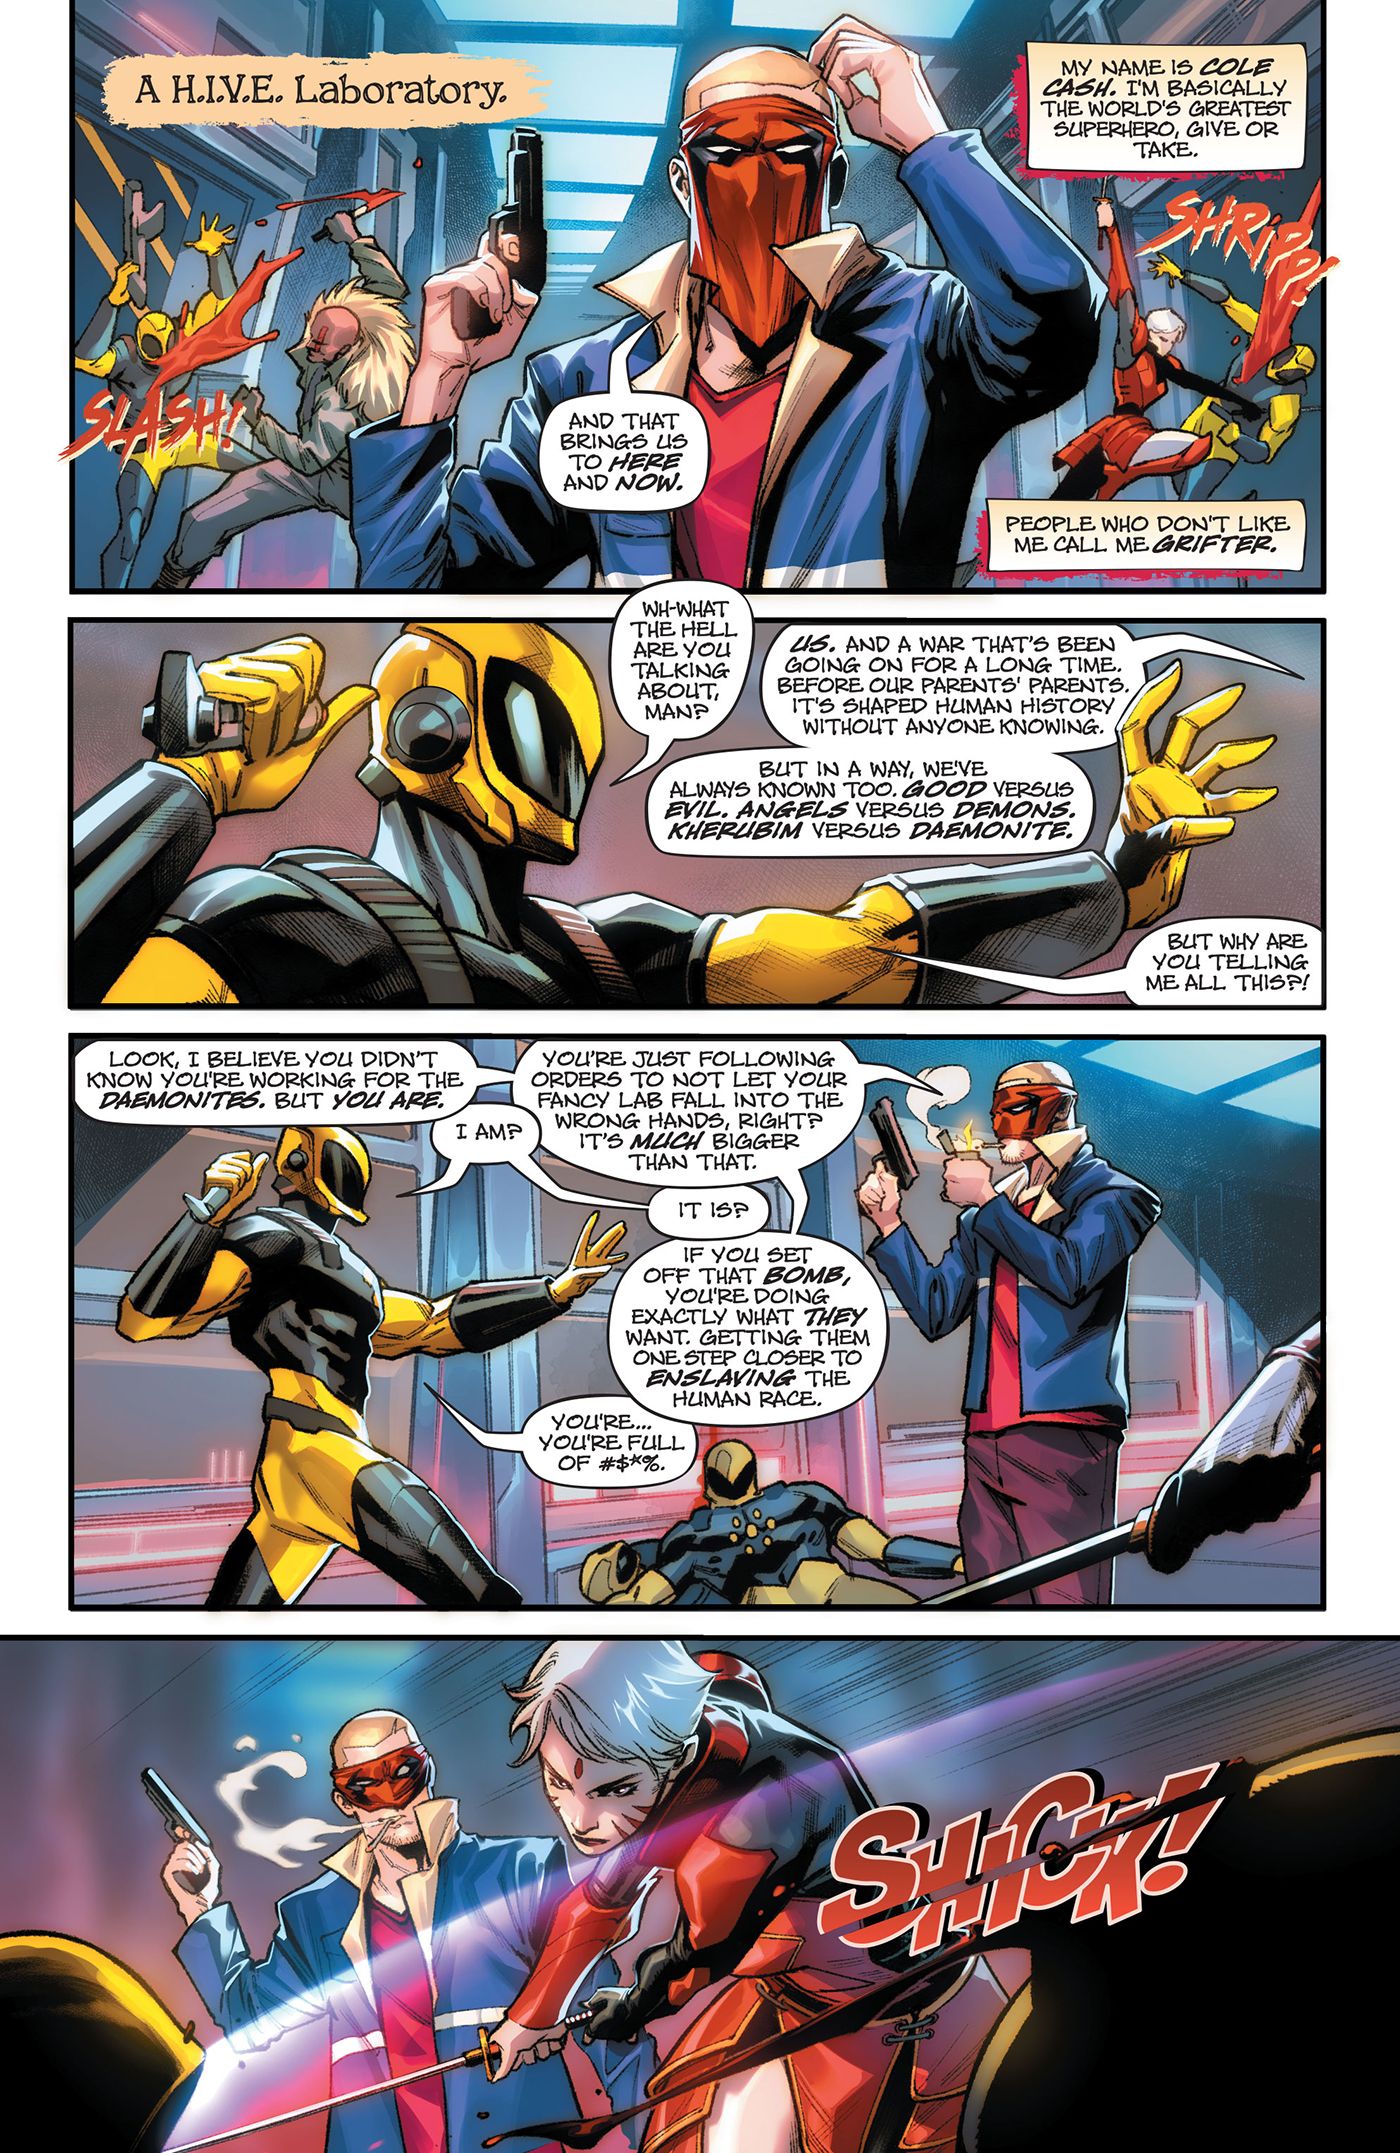 WildCATS_1_preview_2